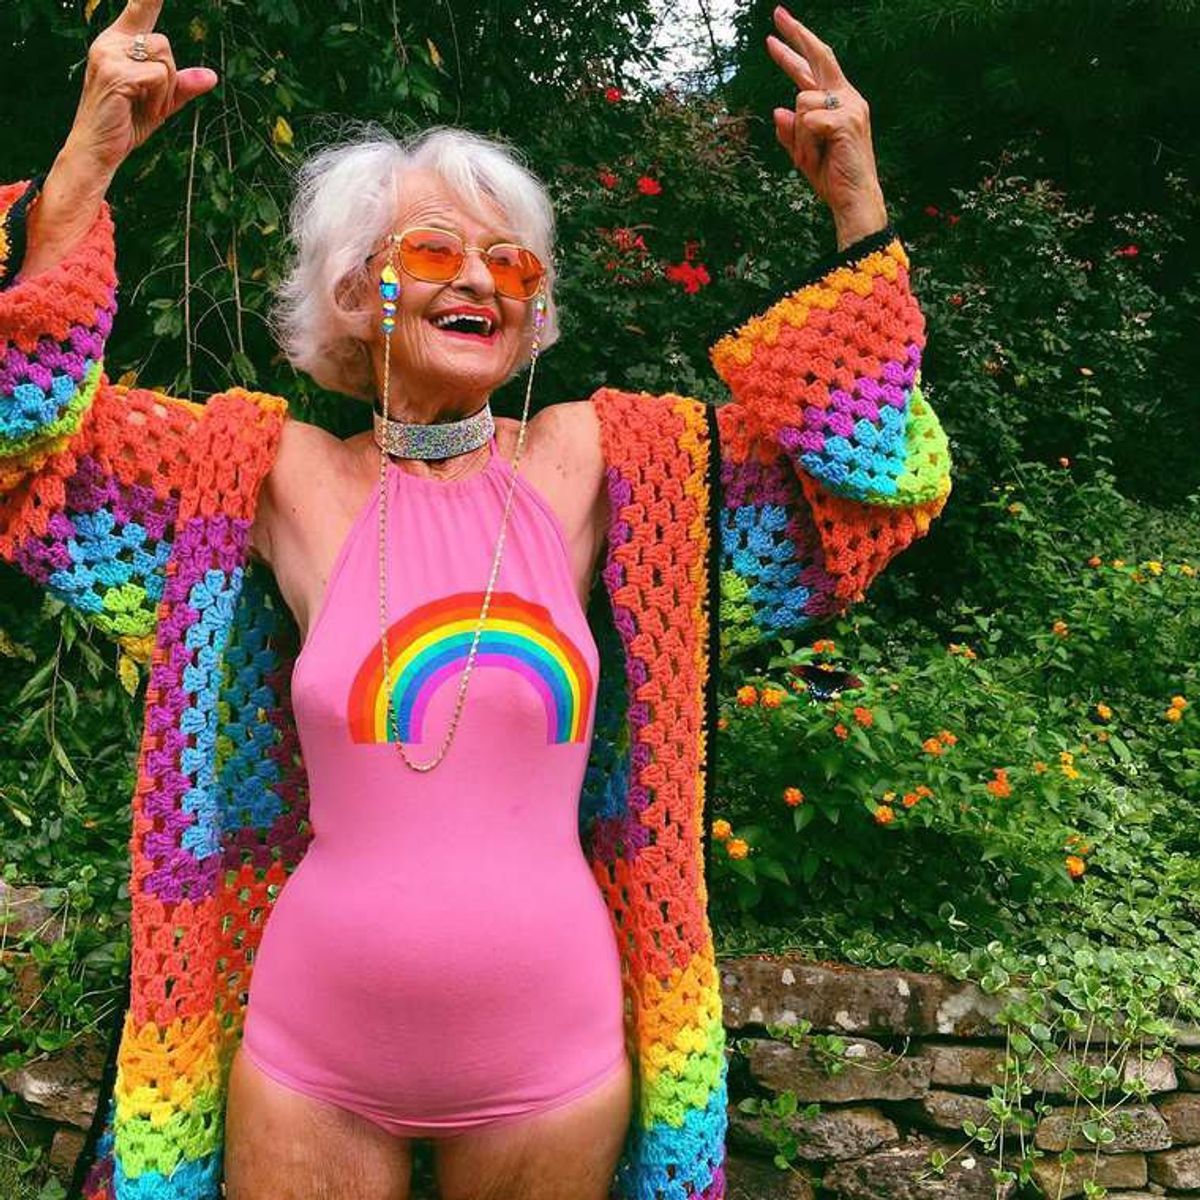 25 Signs That You're A Grandma Trapped In A Young Adult Body